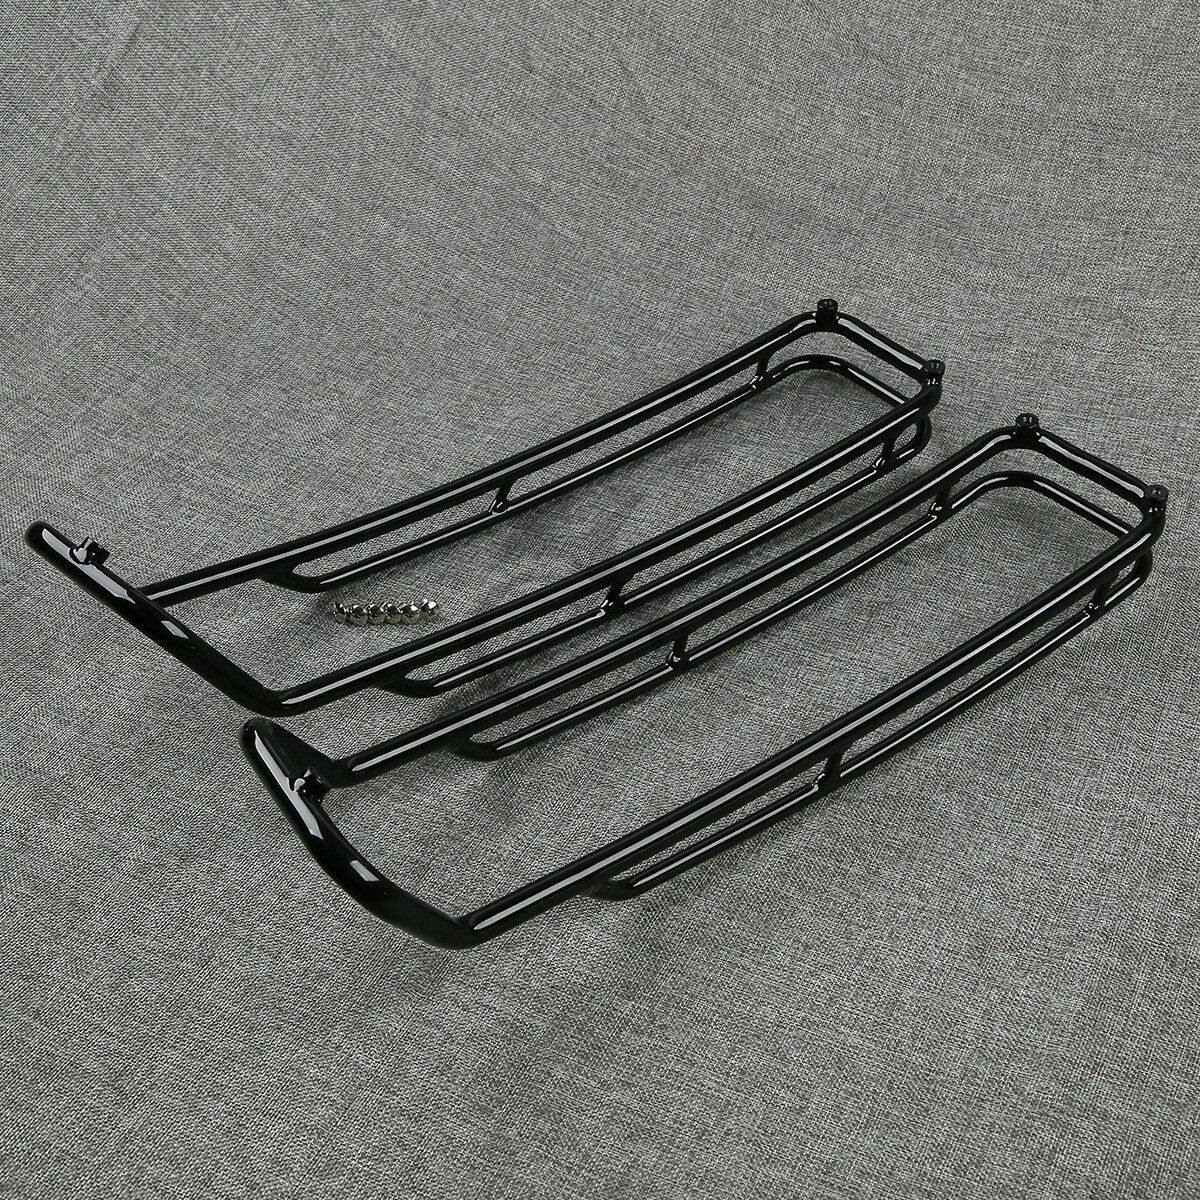 Top Saddlebags Lid Rail Guard Black For Harley Touring Road King Ultra 1994-2013 - Moto Life Products